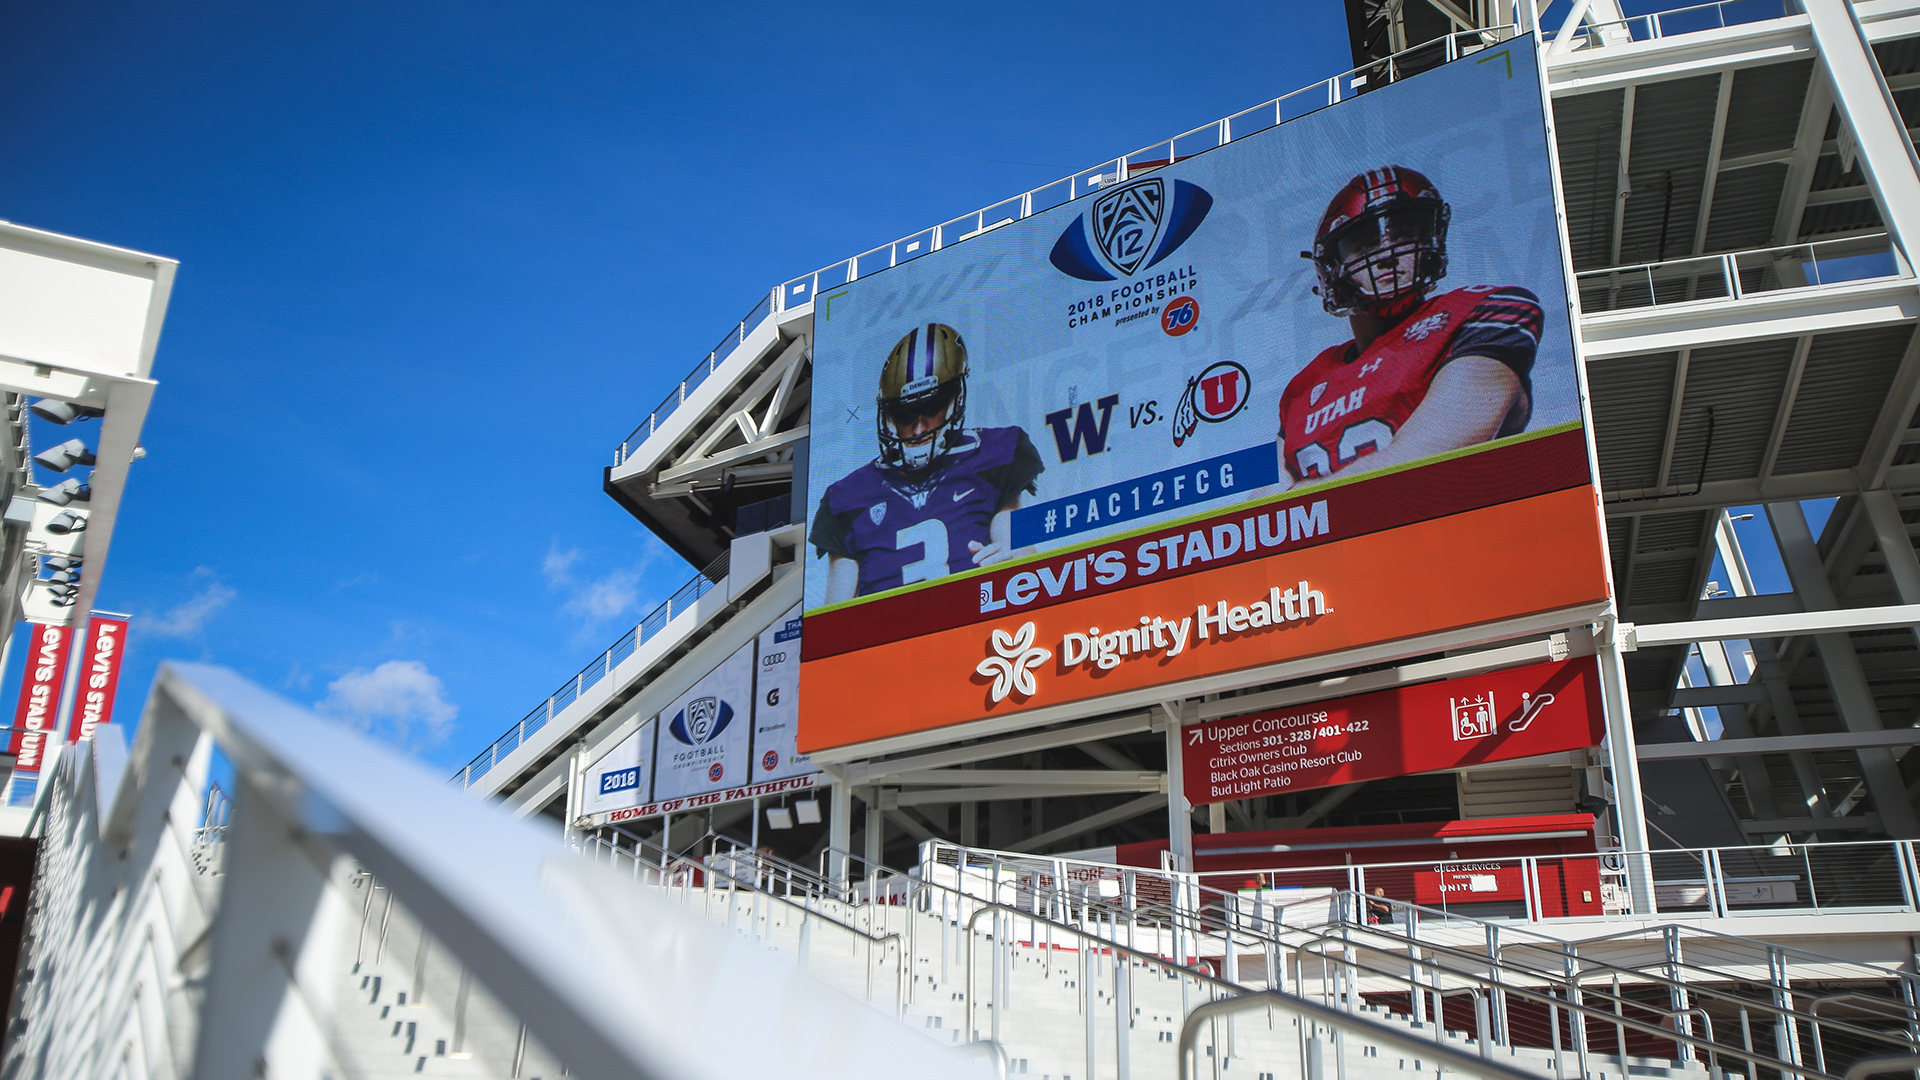 Pac-12 Game Will Leave Levi's Stadium After This Year - The Silicon Valley  Voice